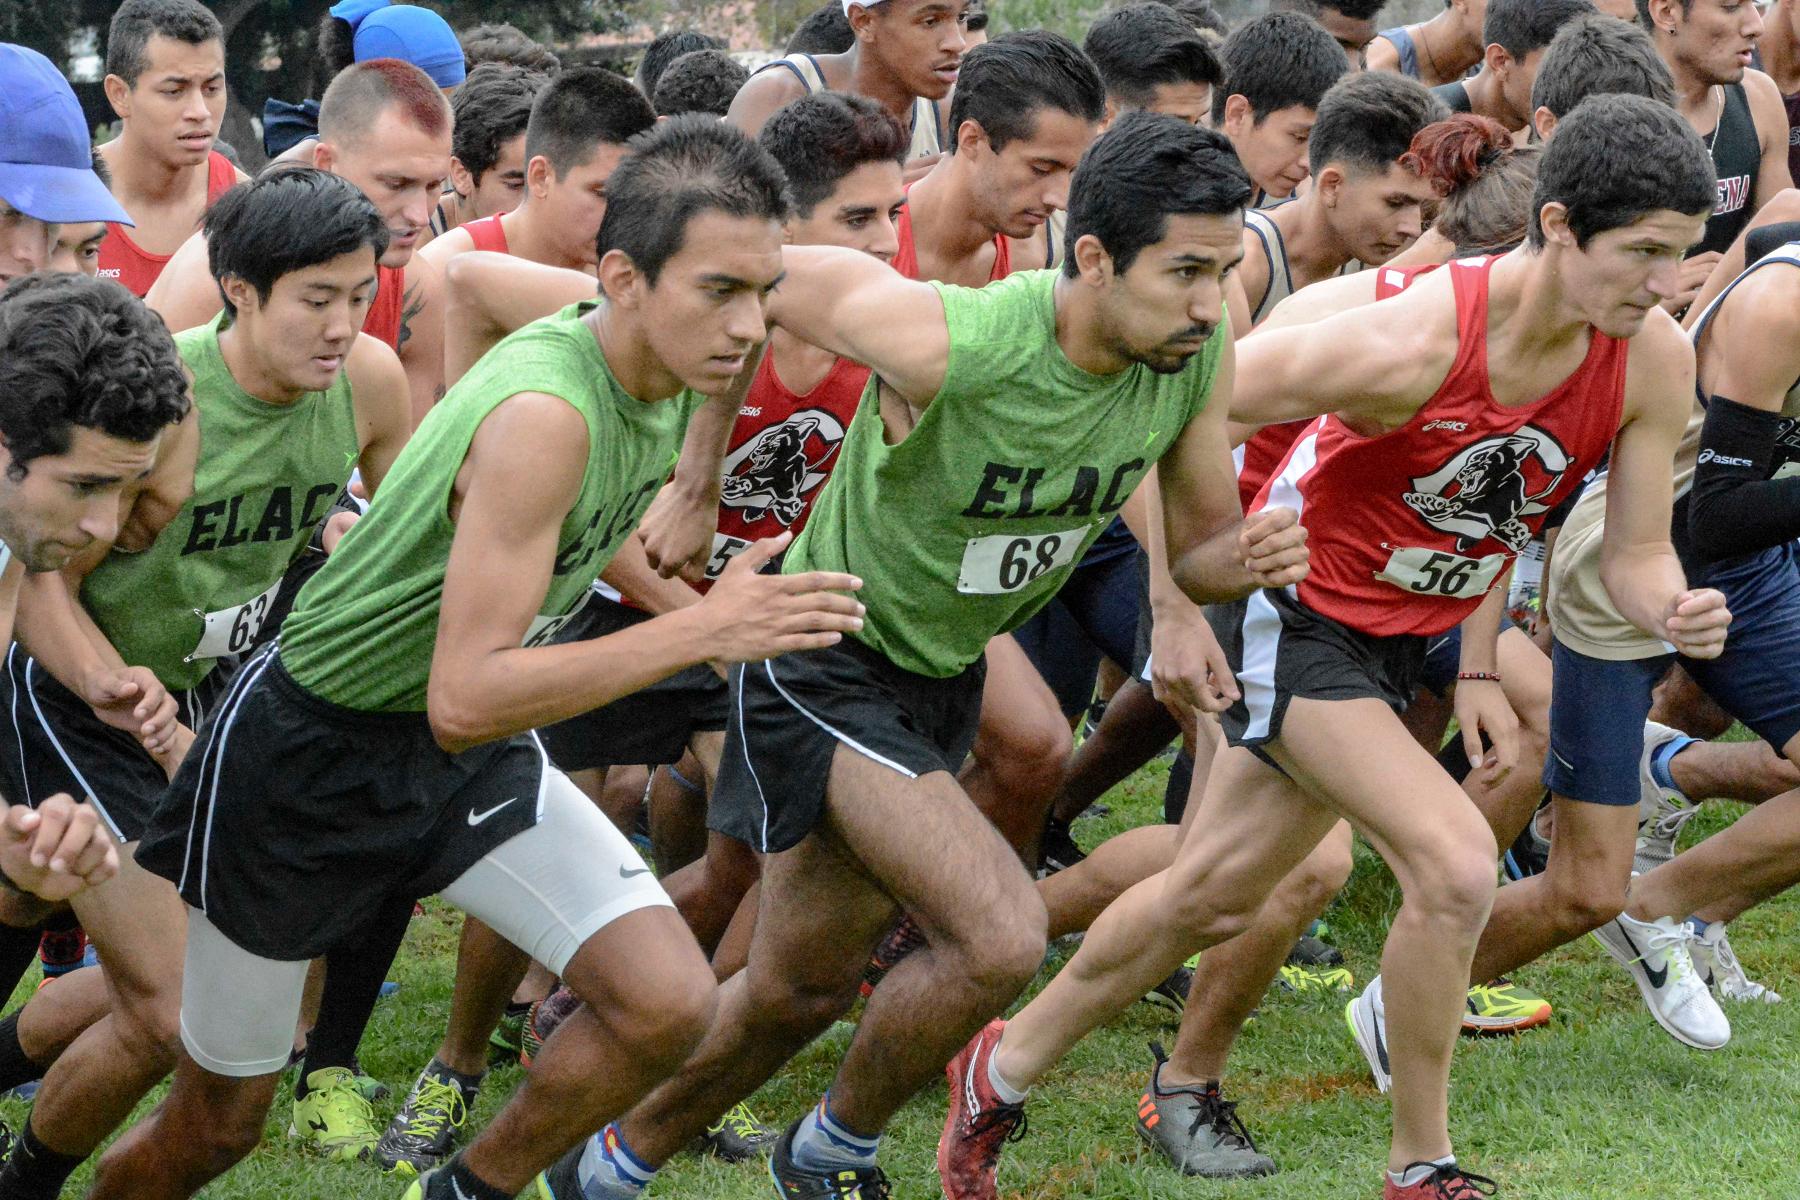 The East Los Angeles College men's cross country team begins the South Coast Conference finals determined on Oct. 28. The Huskies each ran their fastest times of the season and qualified to the SoCal Championships next week. (Photo by Tadzio Garcia)